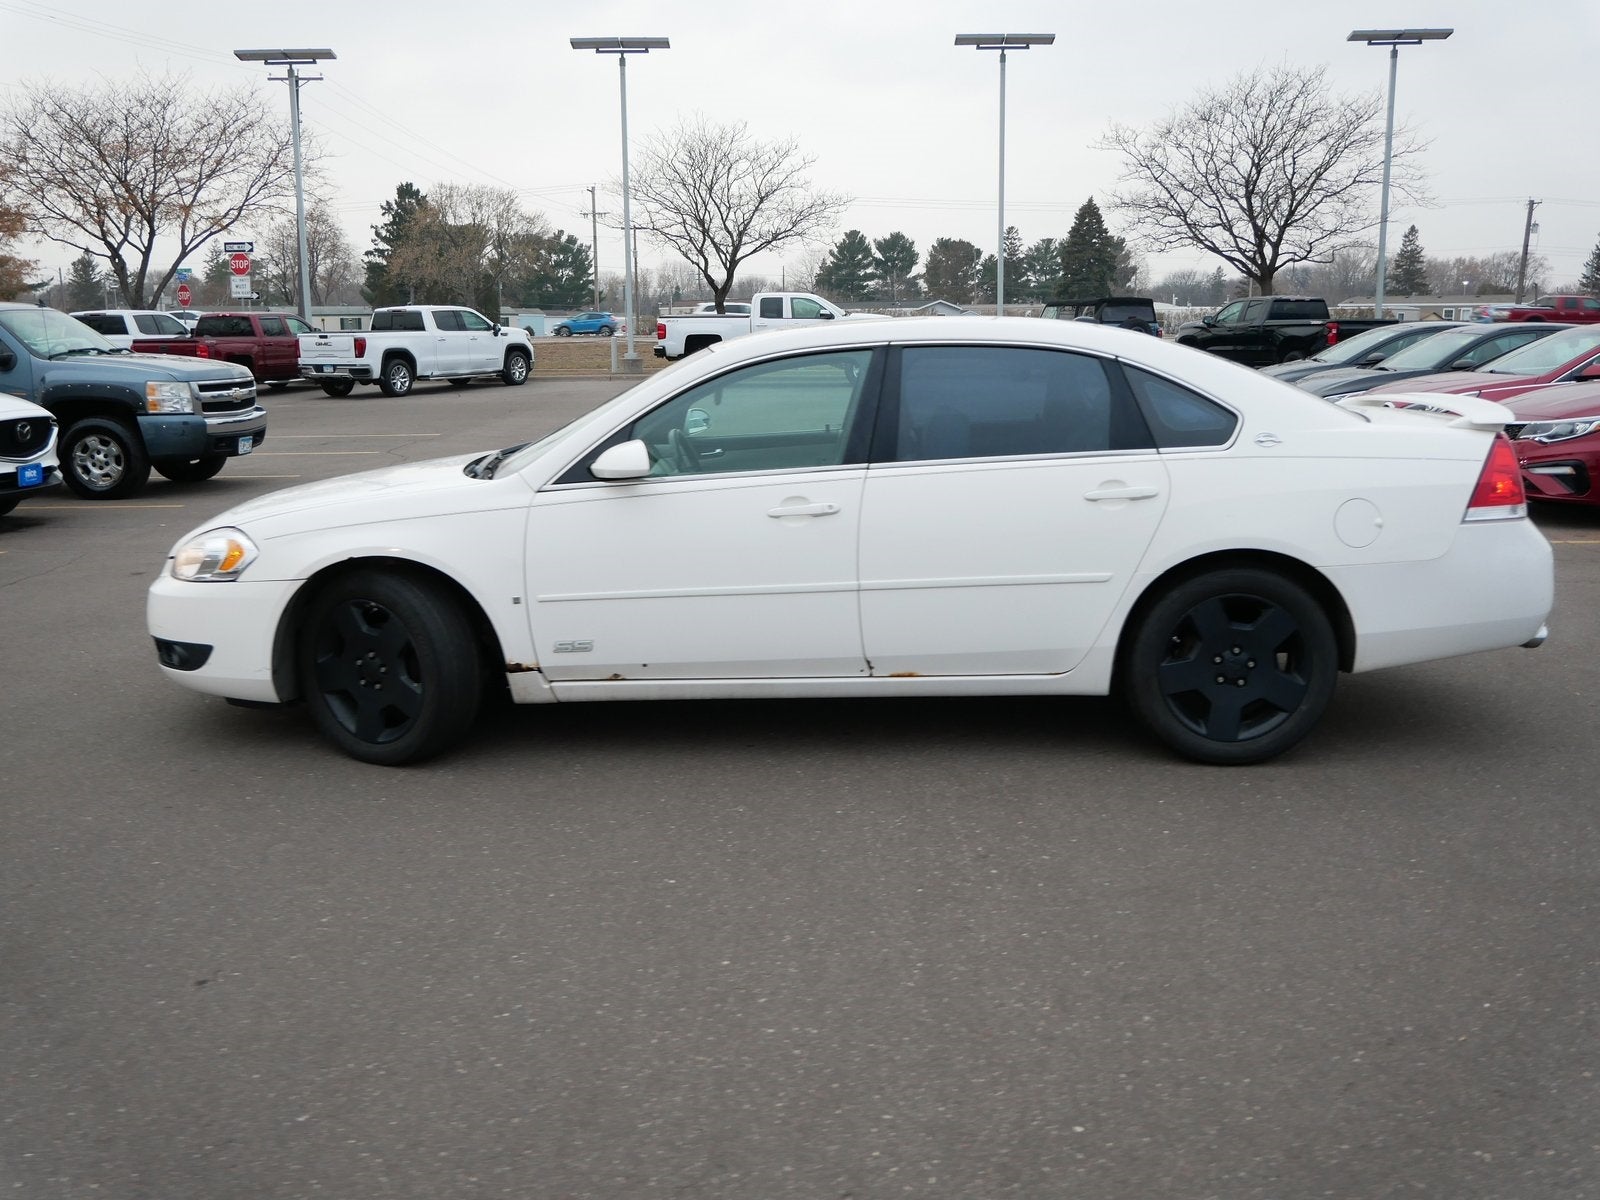 Used 2006 Chevrolet Impala SS with VIN 2G1WD58C869299187 for sale in Fridley, Minnesota